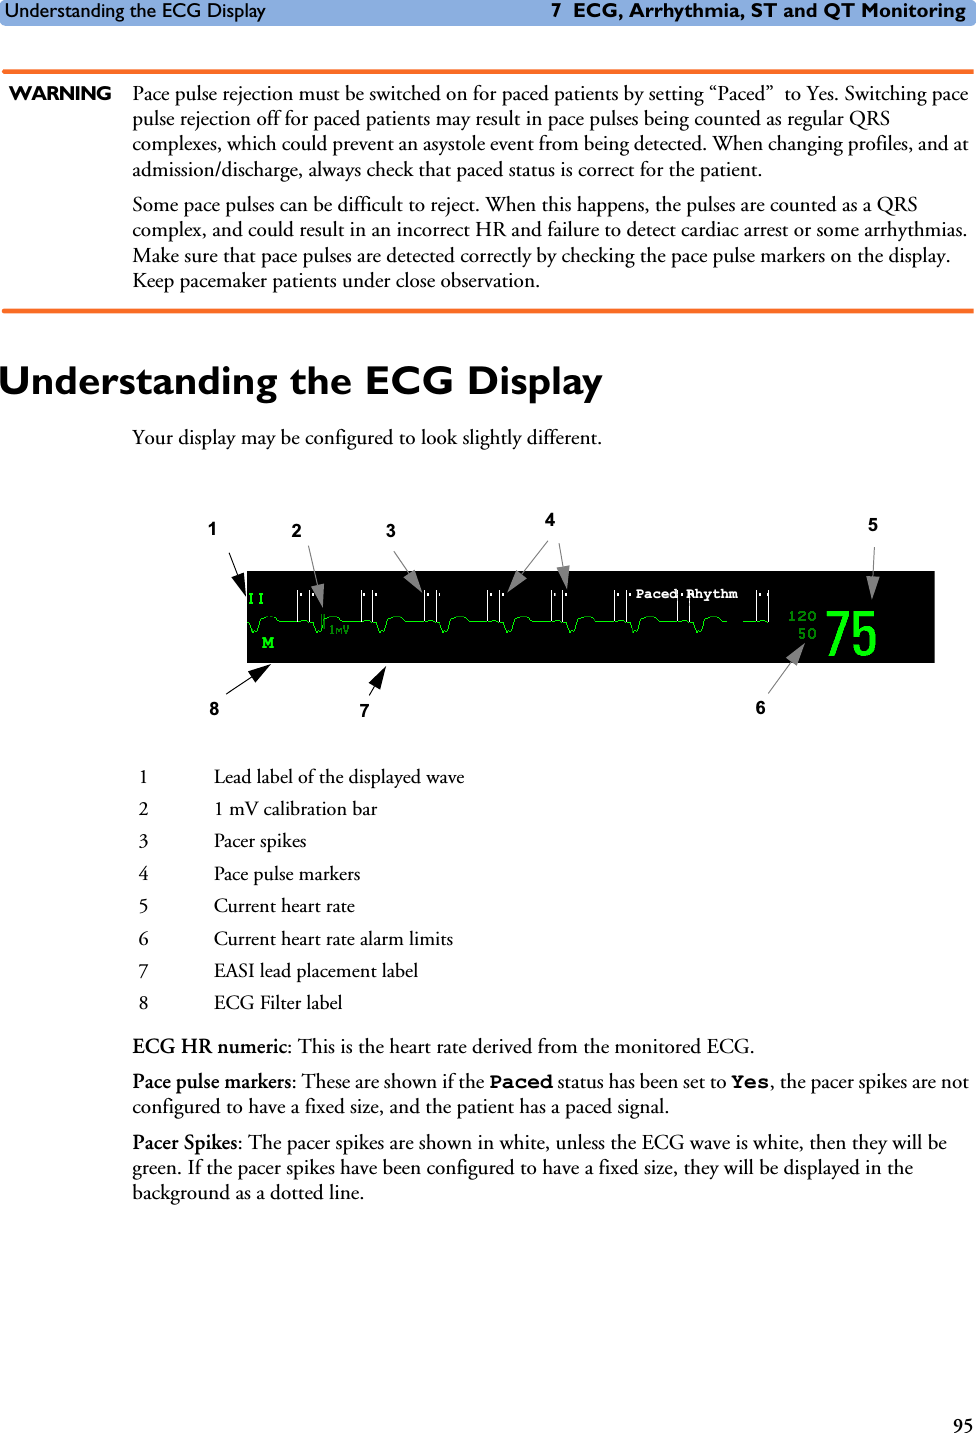 Understanding the ECG Display 7 ECG, Arrhythmia, ST and QT Monitoring95WARNING Pace pulse rejection must be switched on for paced patients by setting “Paced”  to Yes. Switching pace pulse rejection off for paced patients may result in pace pulses being counted as regular QRS complexes, which could prevent an asystole event from being detected. When changing profiles, and at admission/discharge, always check that paced status is correct for the patient.Some pace pulses can be difficult to reject. When this happens, the pulses are counted as a QRS complex, and could result in an incorrect HR and failure to detect cardiac arrest or some arrhythmias. Make sure that pace pulses are detected correctly by checking the pace pulse markers on the display. Keep pacemaker patients under close observation.Understanding the ECG DisplayYour display may be configured to look slightly different.ECG HR numeric: This is the heart rate derived from the monitored ECG. Pace pulse markers: These are shown if the Paced status has been set to Yes, the pacer spikes are not configured to have a fixed size, and the patient has a paced signal.Pacer Spikes: The pacer spikes are shown in white, unless the ECG wave is white, then they will be green. If the pacer spikes have been configured to have a fixed size, they will be displayed in the background as a dotted line.1 Lead label of the displayed wave2 1 mV calibration bar3Pacer spikes4 Pace pulse markers5 Current heart rate6 Current heart rate alarm limits7 EASI lead placement label8 ECG Filter labelEASIMHR bpm4816573Paced Rhythm2